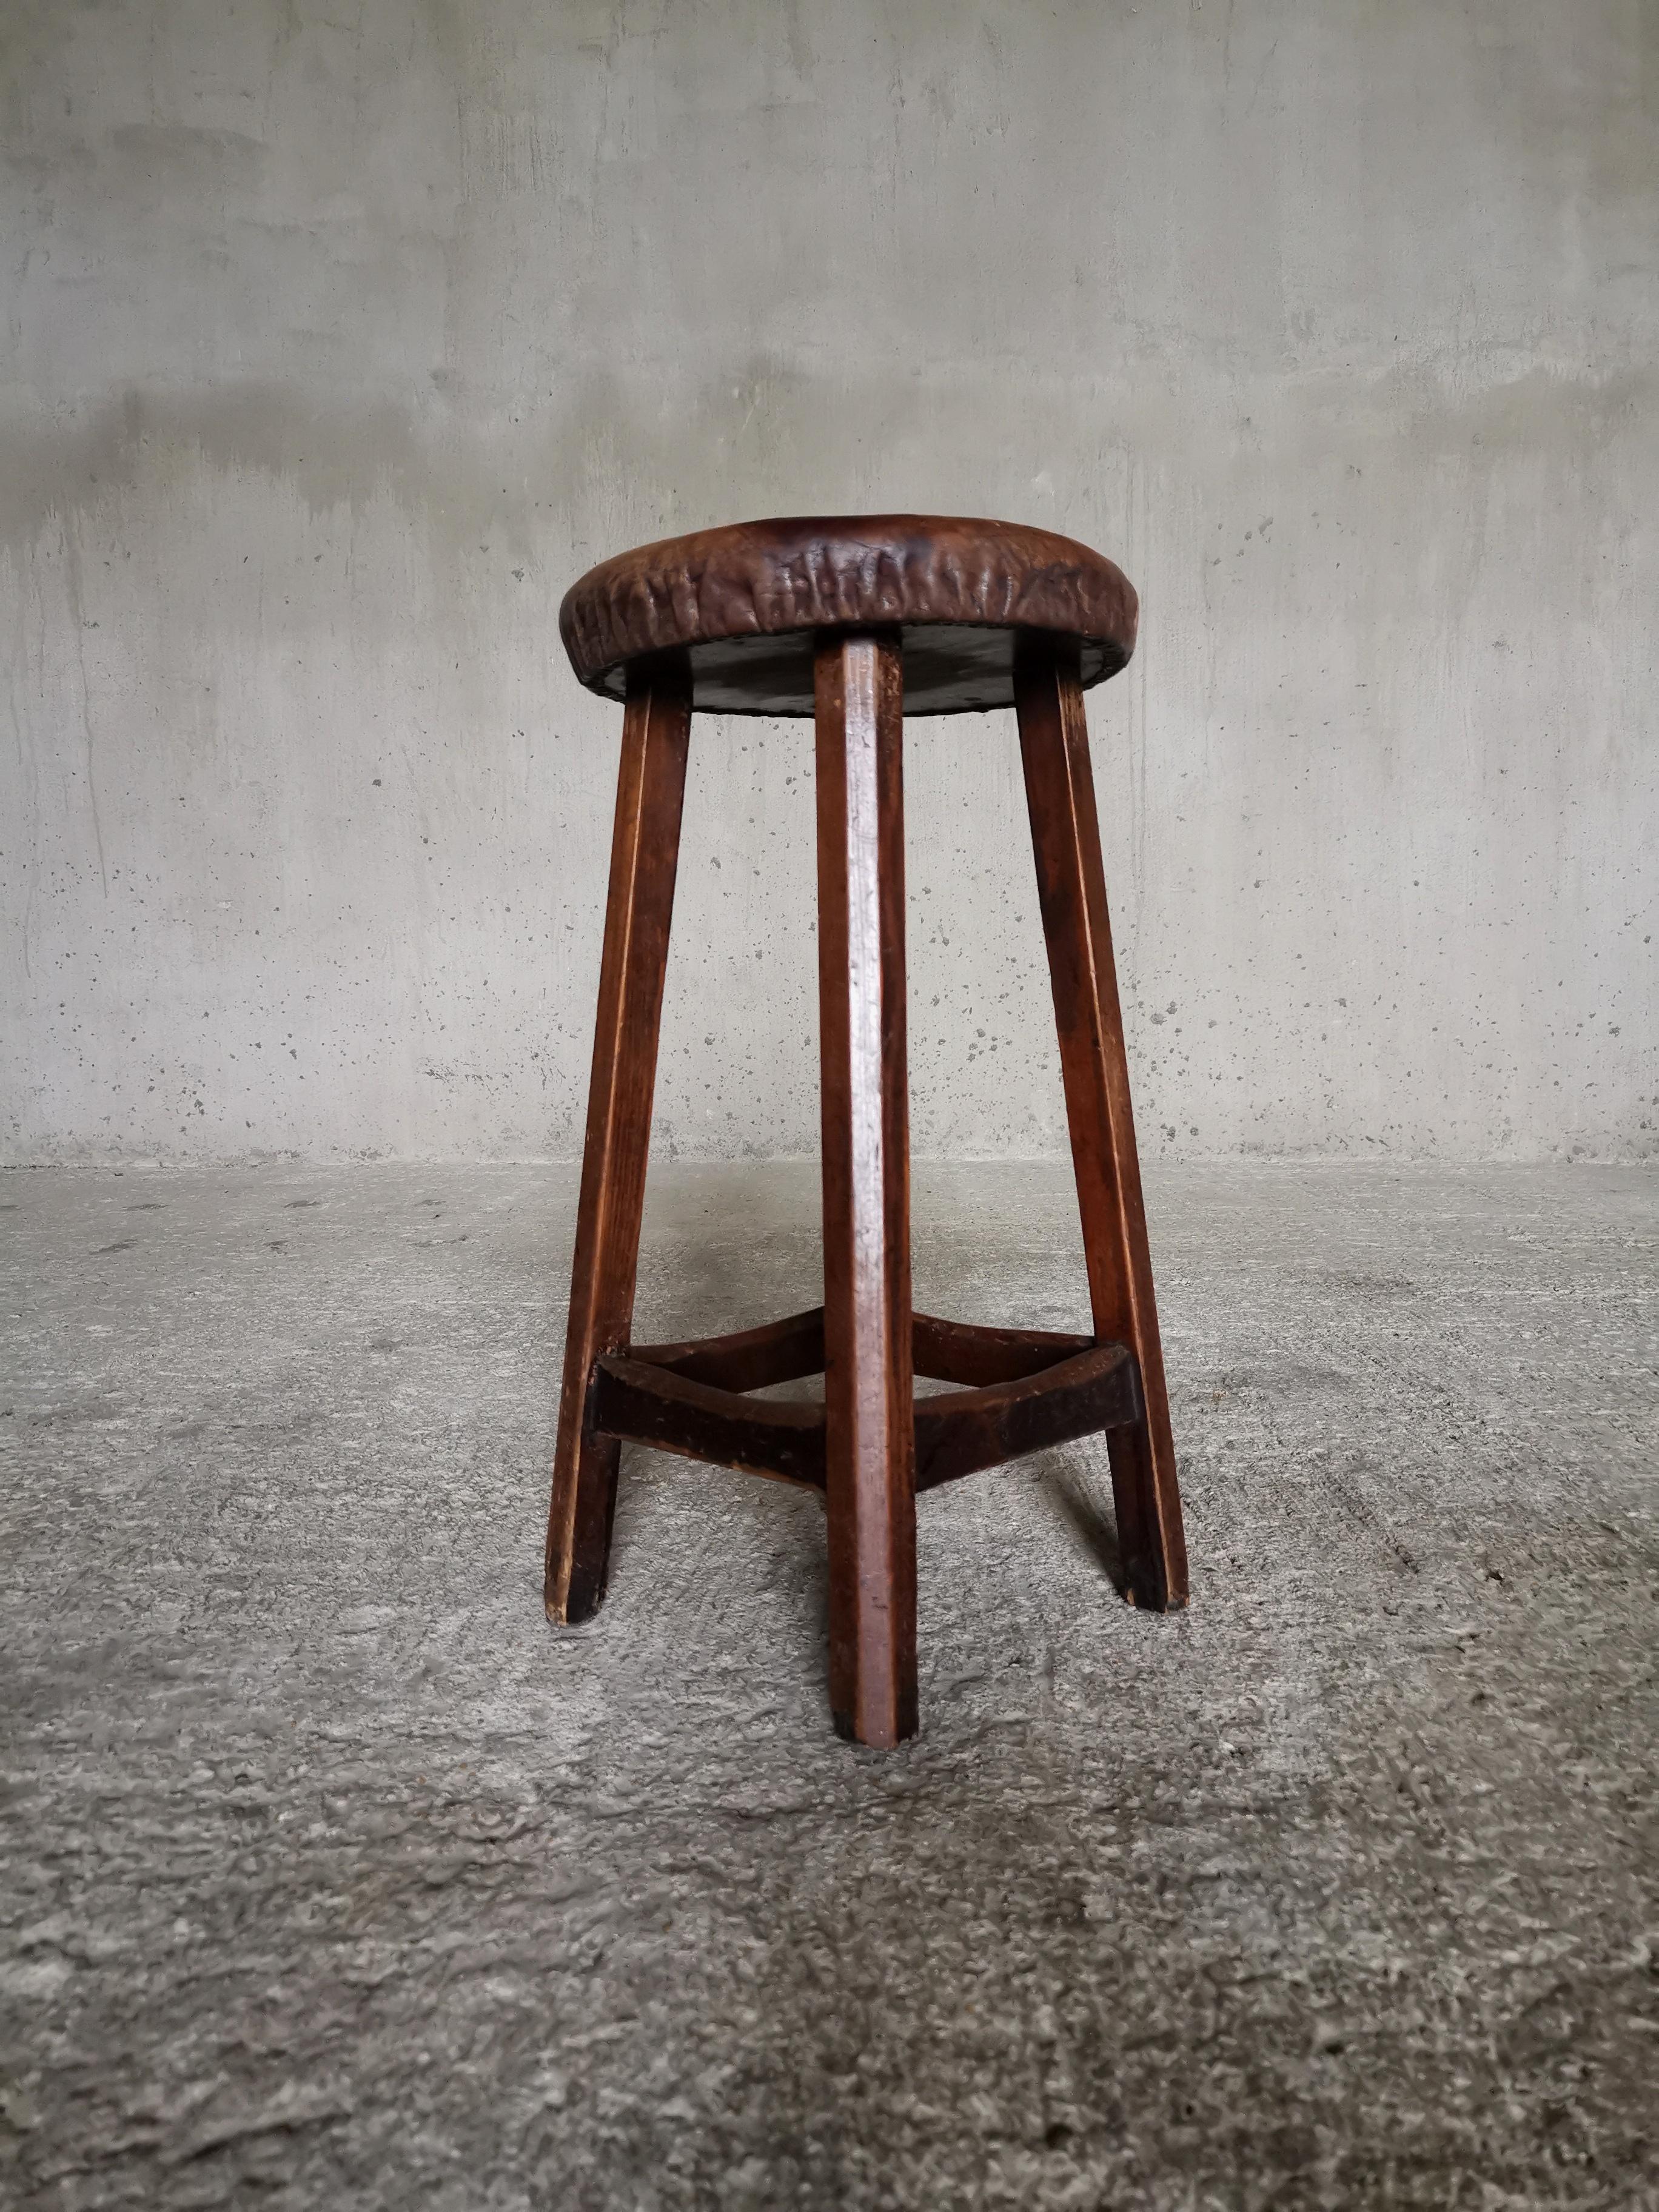 A stunning pair of Swedish 1930-40s workshop stools in solid pine. 
Thick, smooth and intact leather seats with a refined lustre. Seats meticulously mounted with an string of tiny nails. 
Well crafted traditional joinery work of dark patina wood